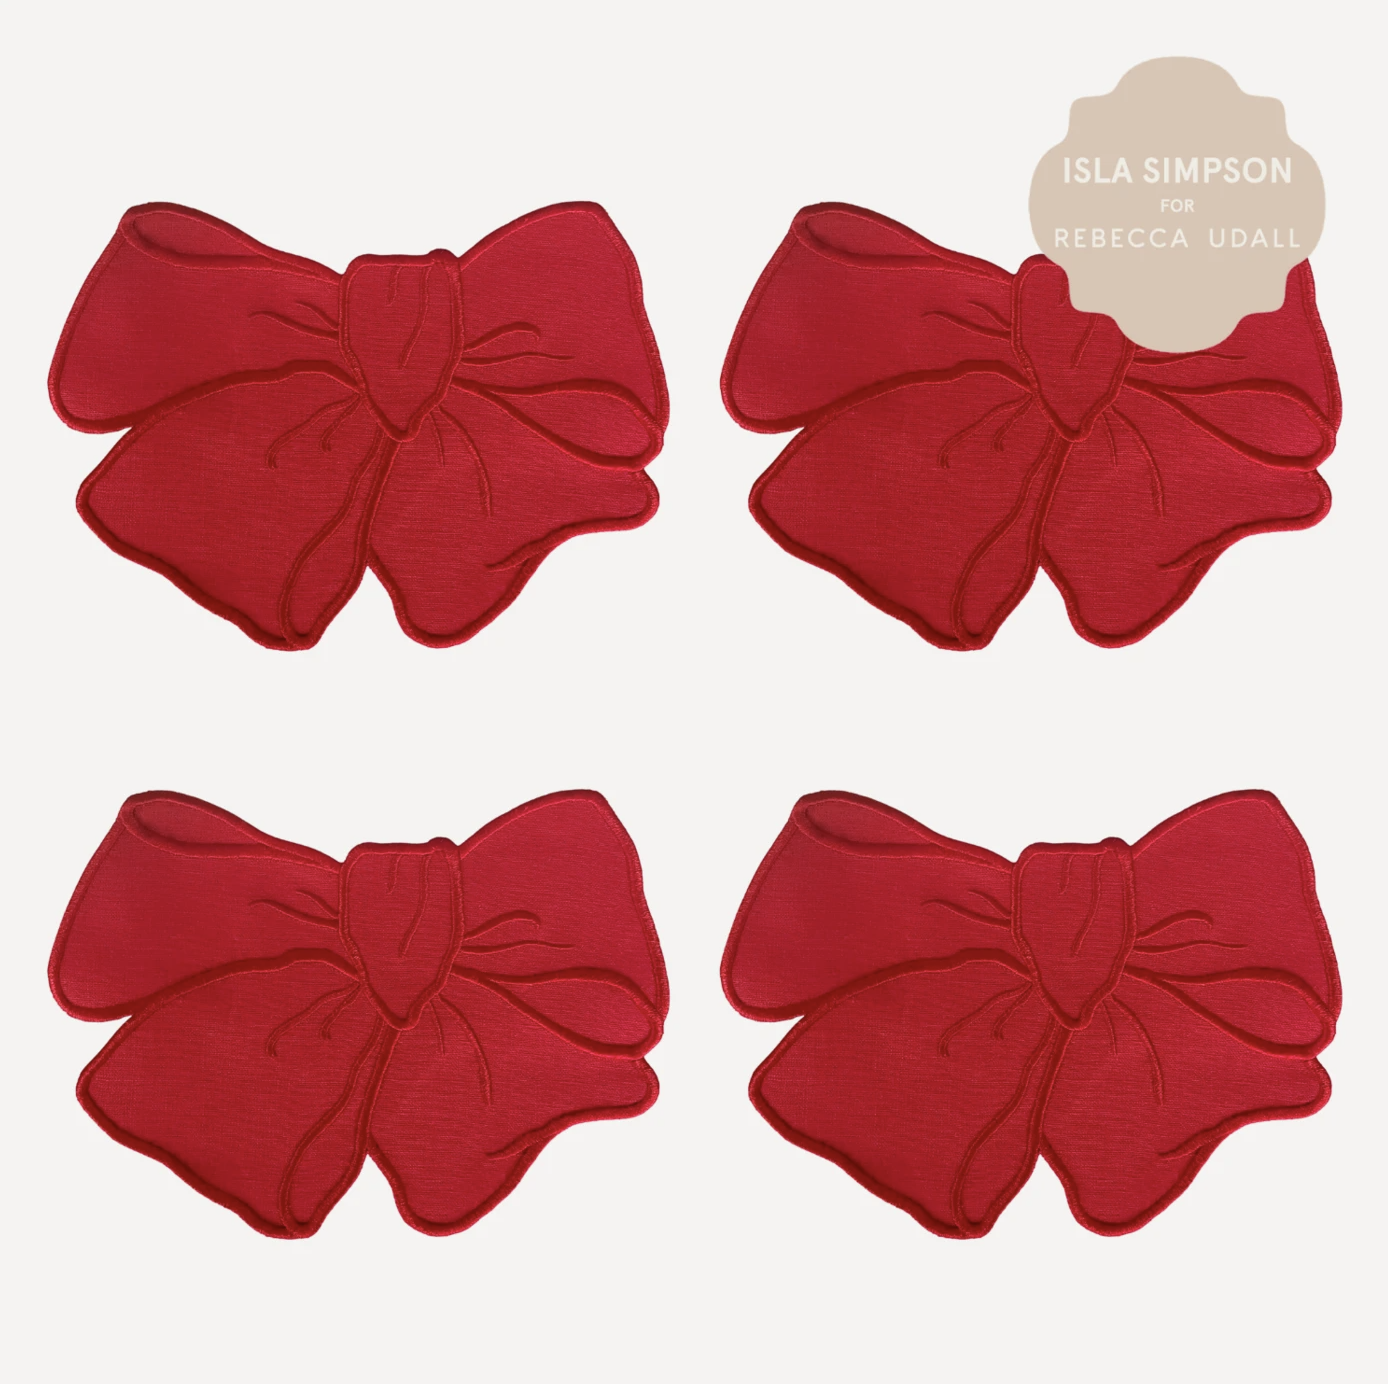 Isla Simpson for Rebecca Udall,SET OF 4 COCKTAIL BOW LINEN NAPKINS, RED